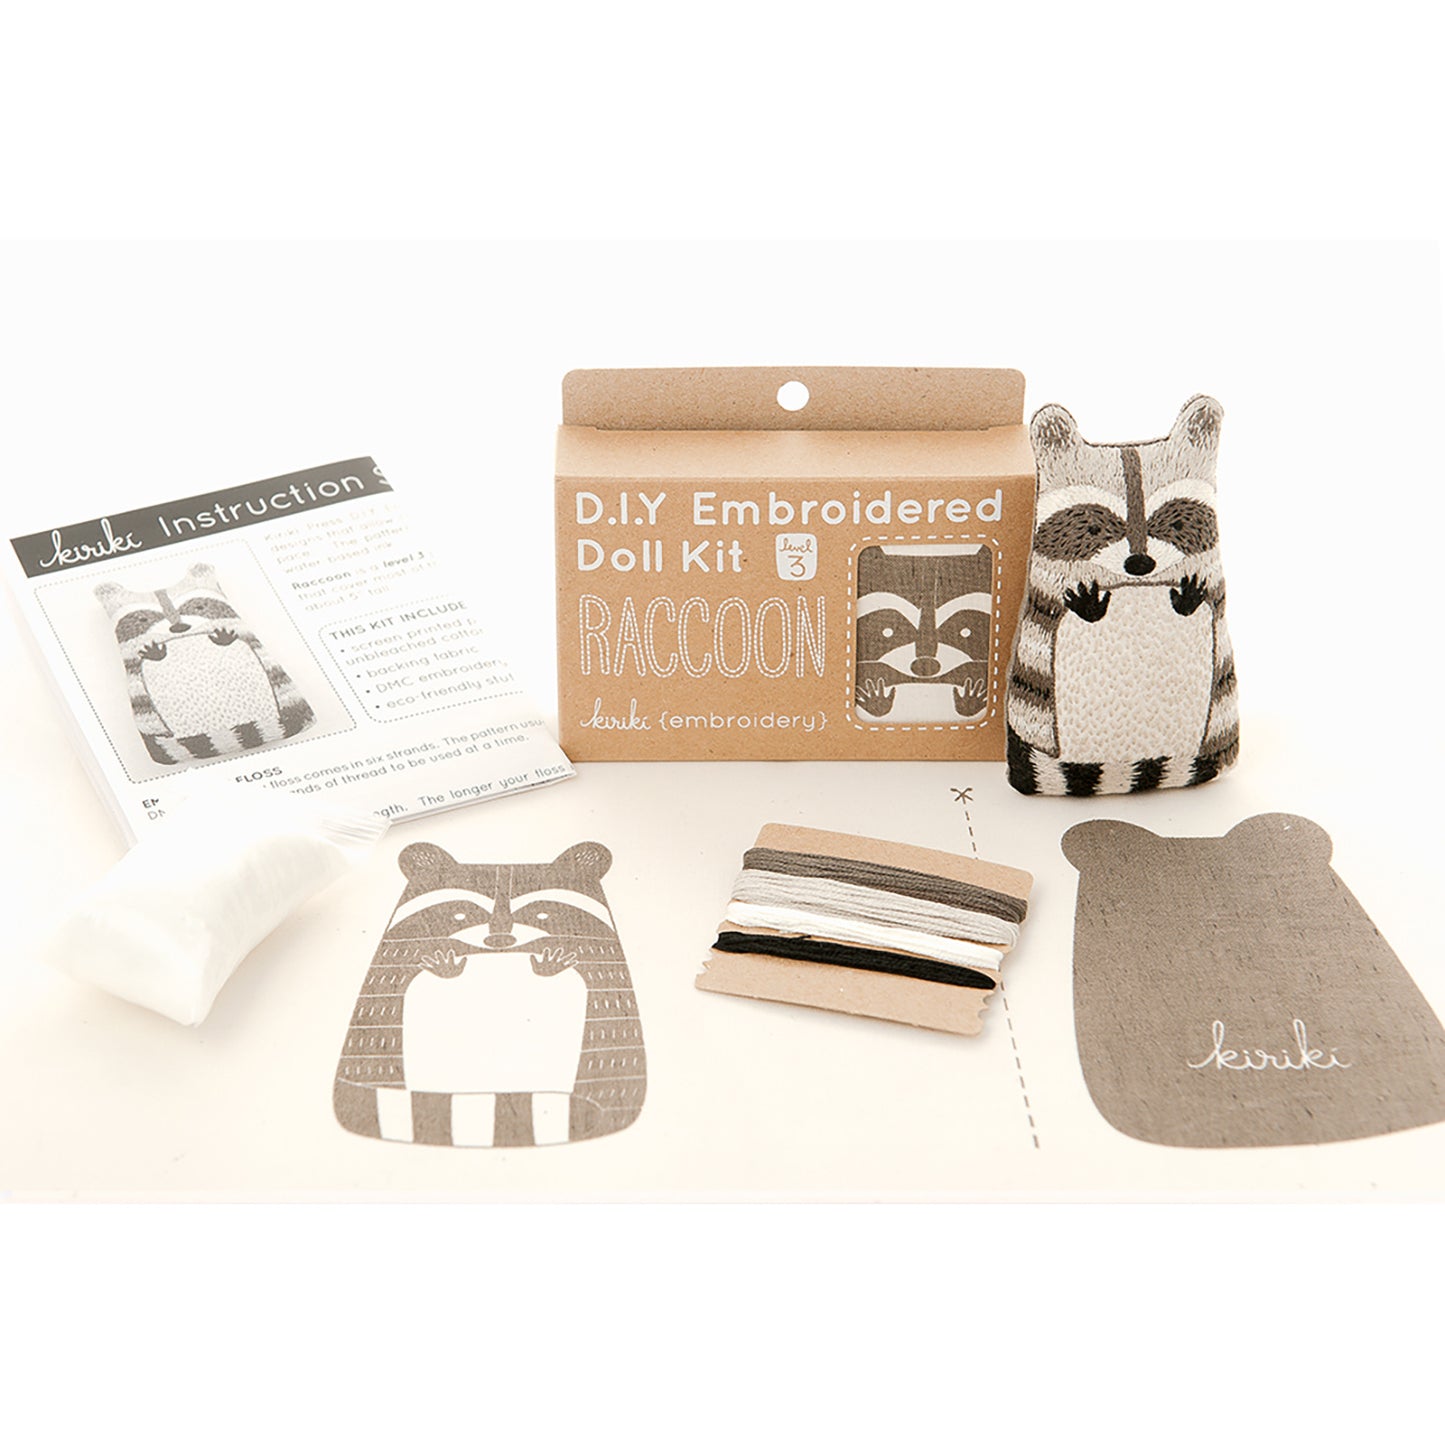 D.I.Y. Embroidered Doll Kit - Raccoon Alternative View #2